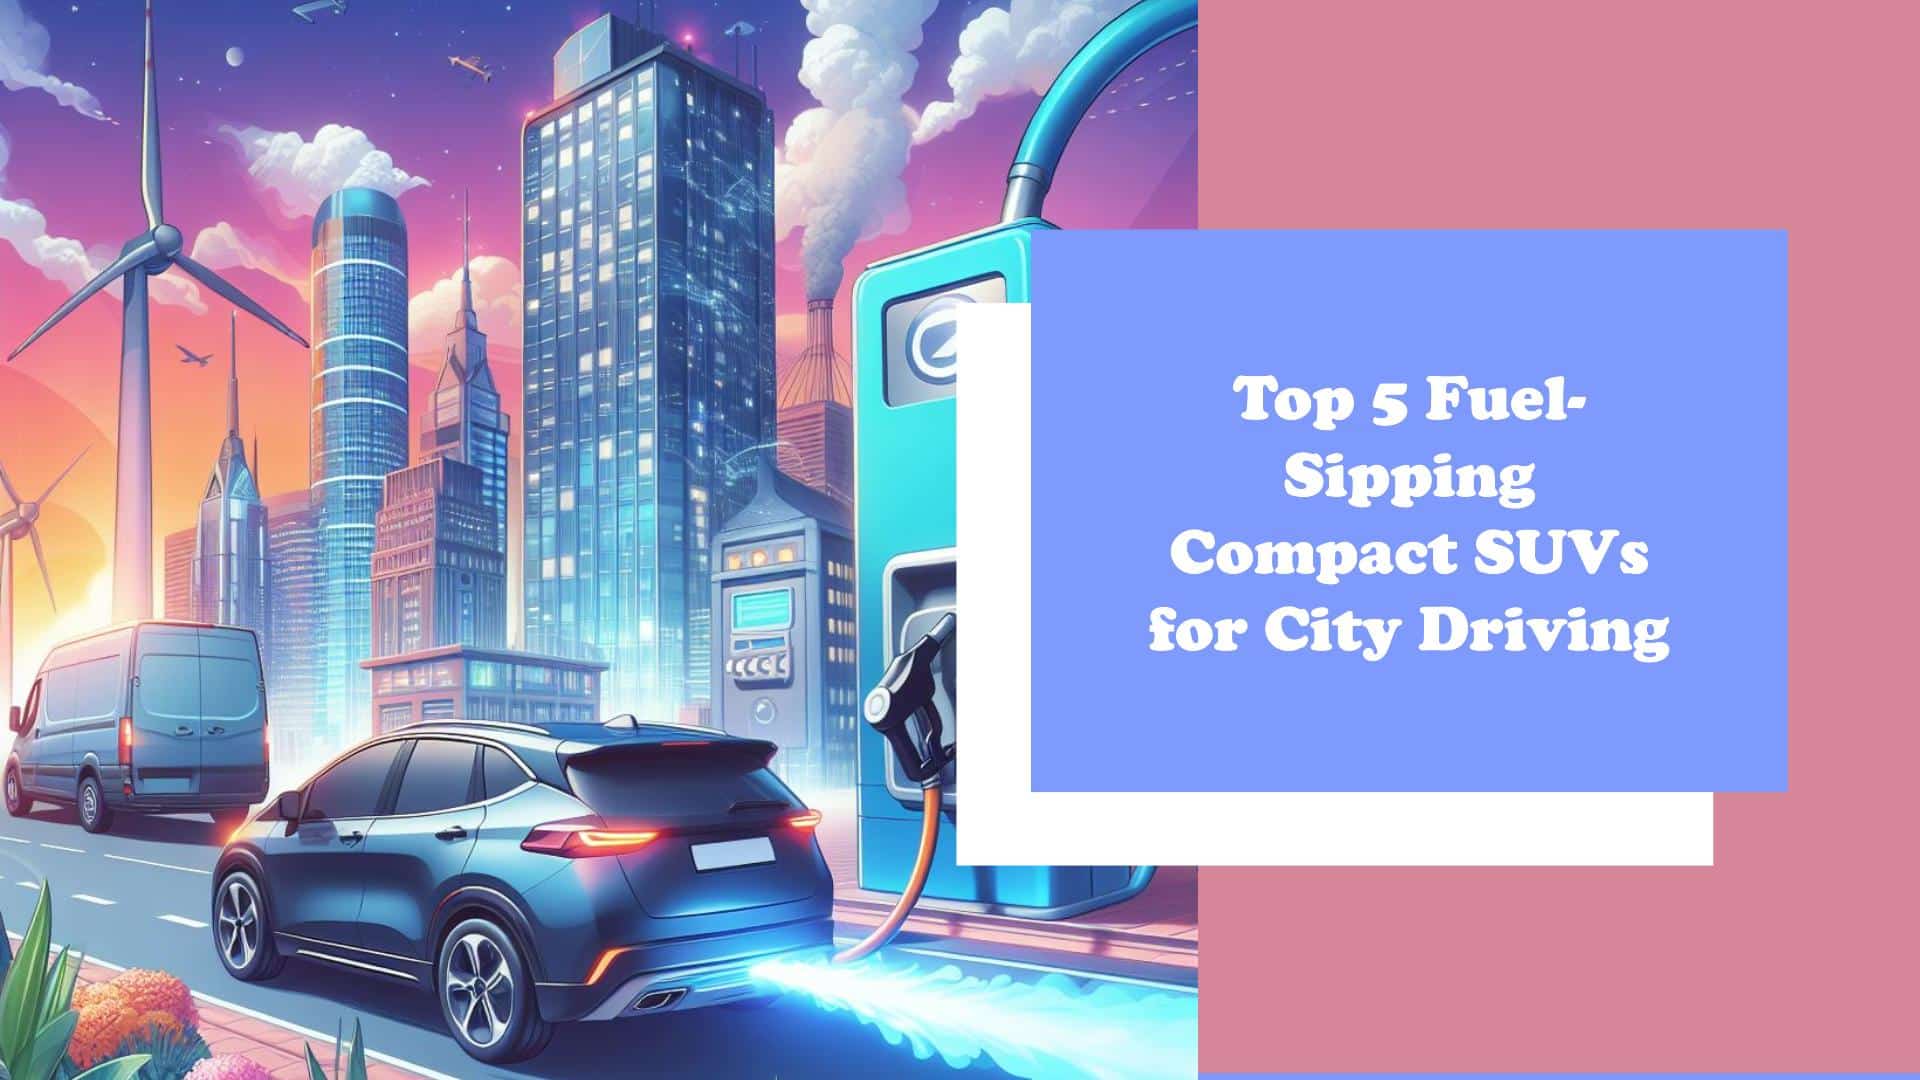 Top 5 Fuel-Sipping Compact SUVs Perfect for City Driving